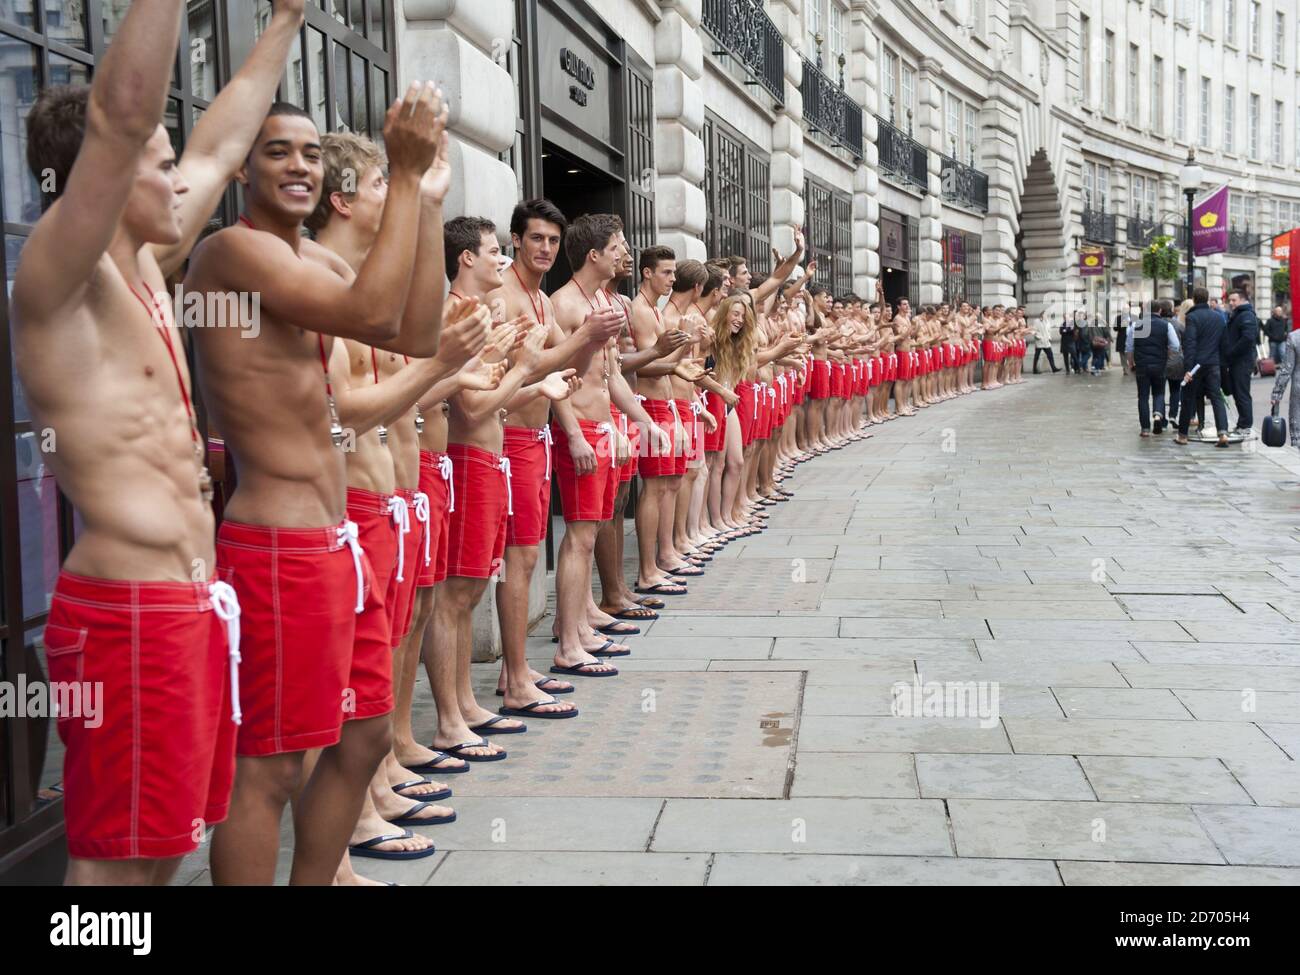 Models dressed as lifeguards pictured as they open the new Gilly